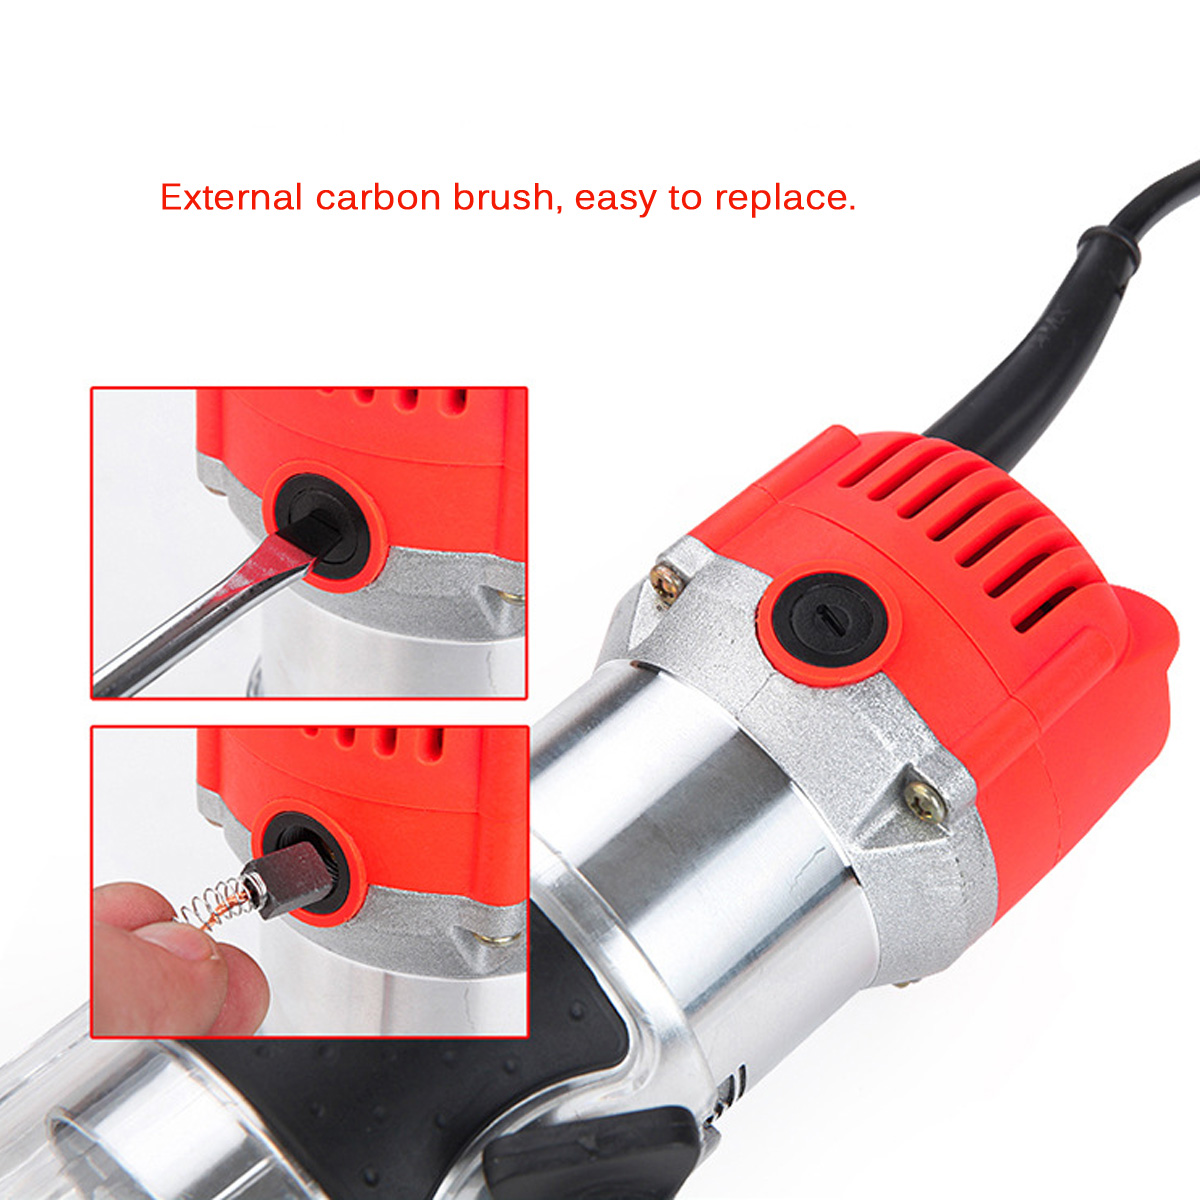 1100W-Electric-Hand-Trimmer-Palm-Router-Wood-Laminate-Joiner-Tool-Variable-Speed-1808421-9